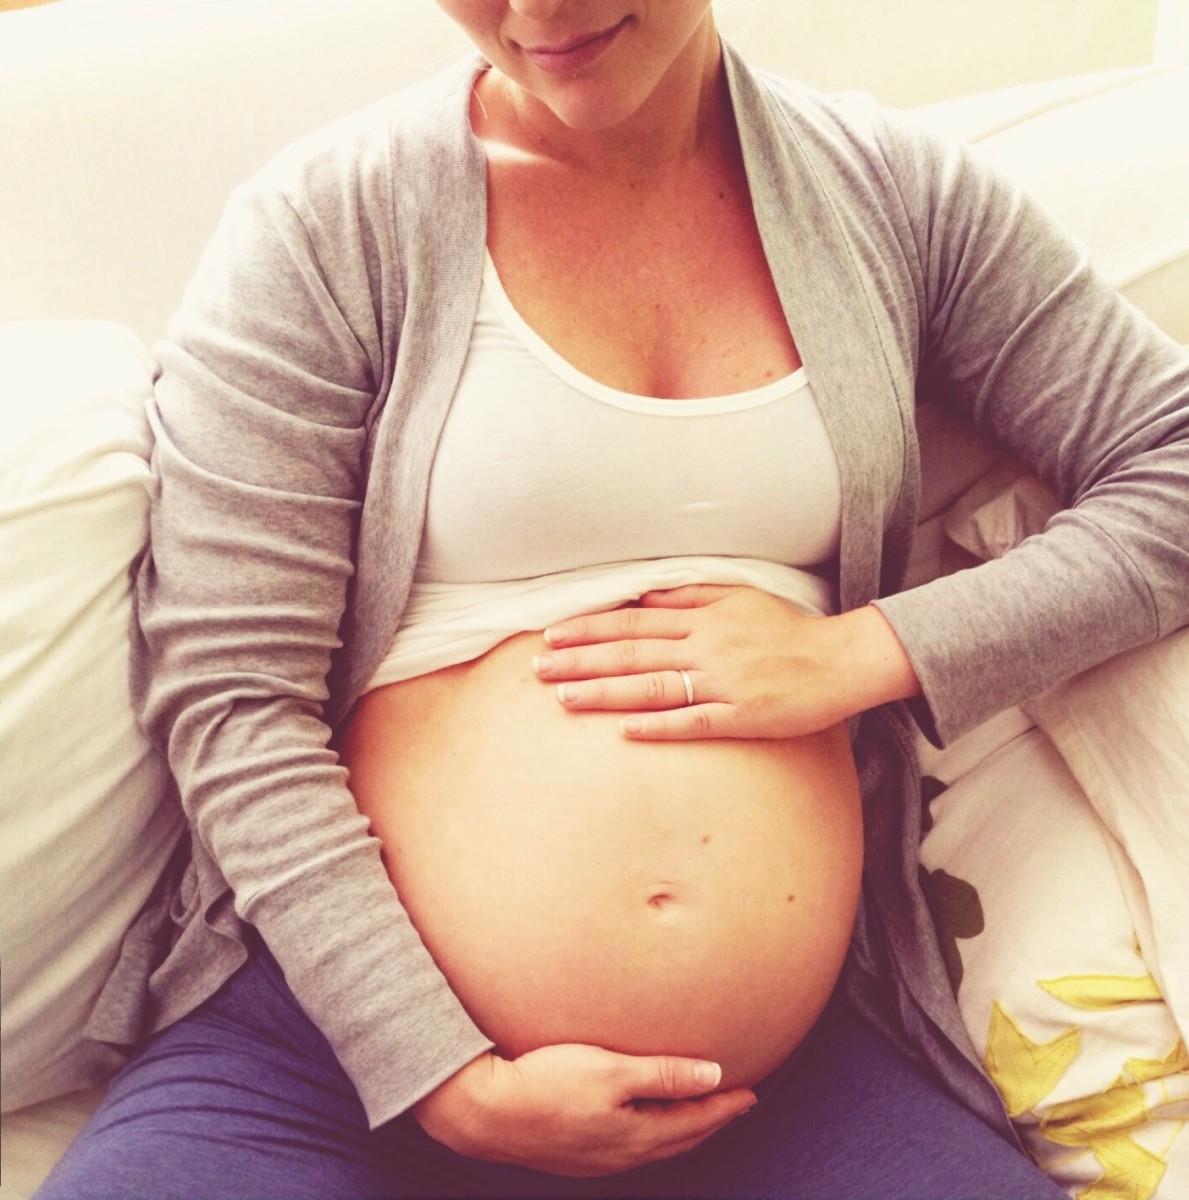 What if You Need Anesthesia and Surgery While Pregnant?